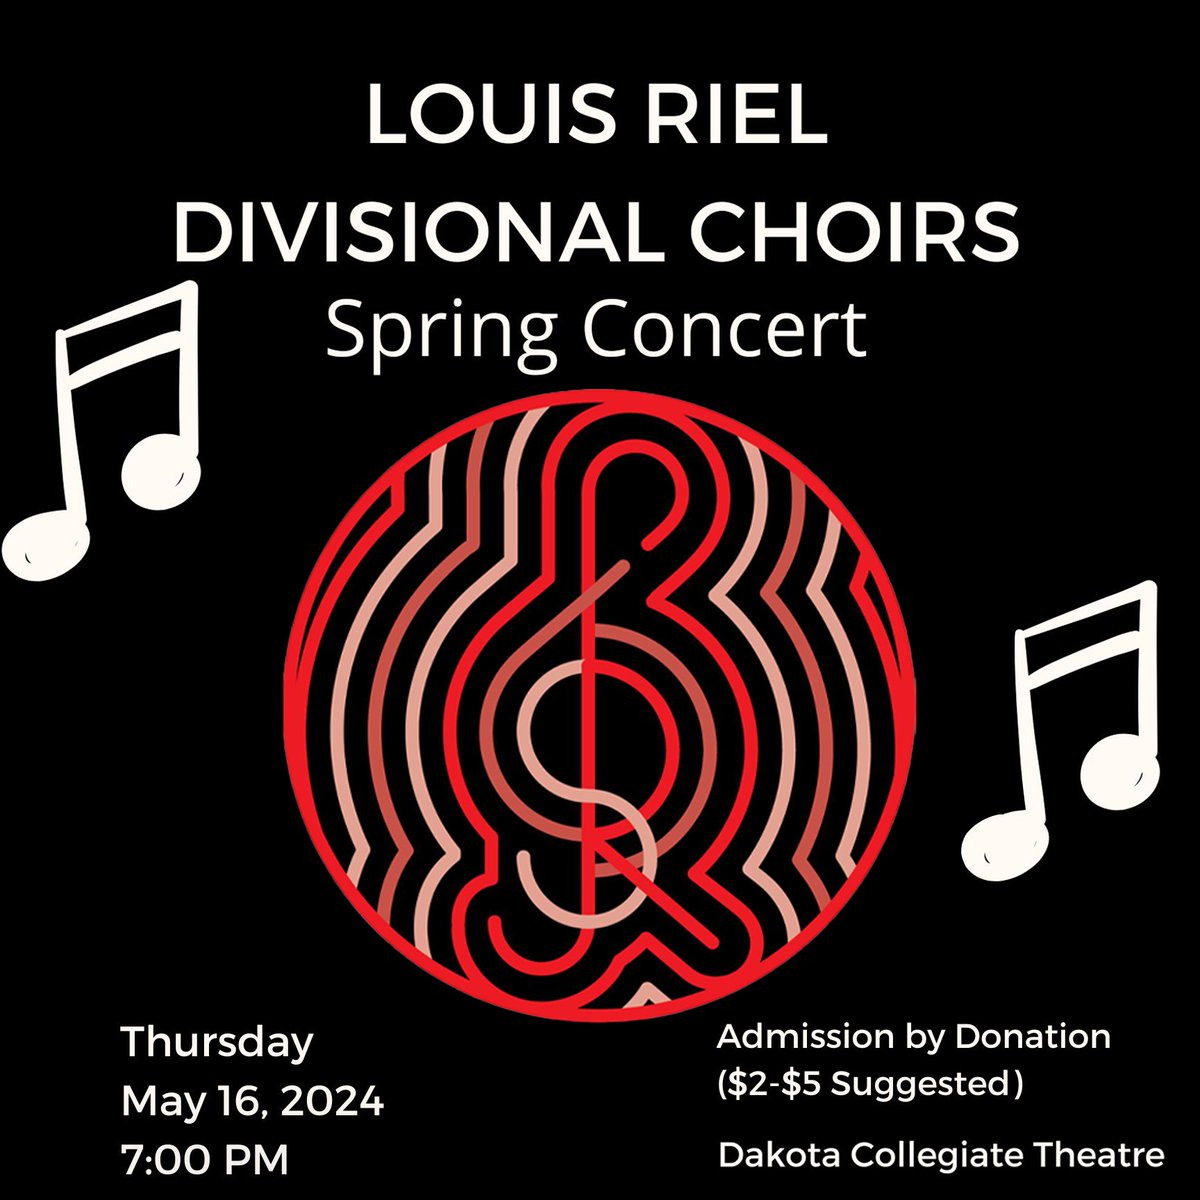 Wo-ah, woah, listen to the music 🎵... at the Louis Riel Divisional Choirs Spring Concert on Thursday this week at Dakota Collegiate Theatre!